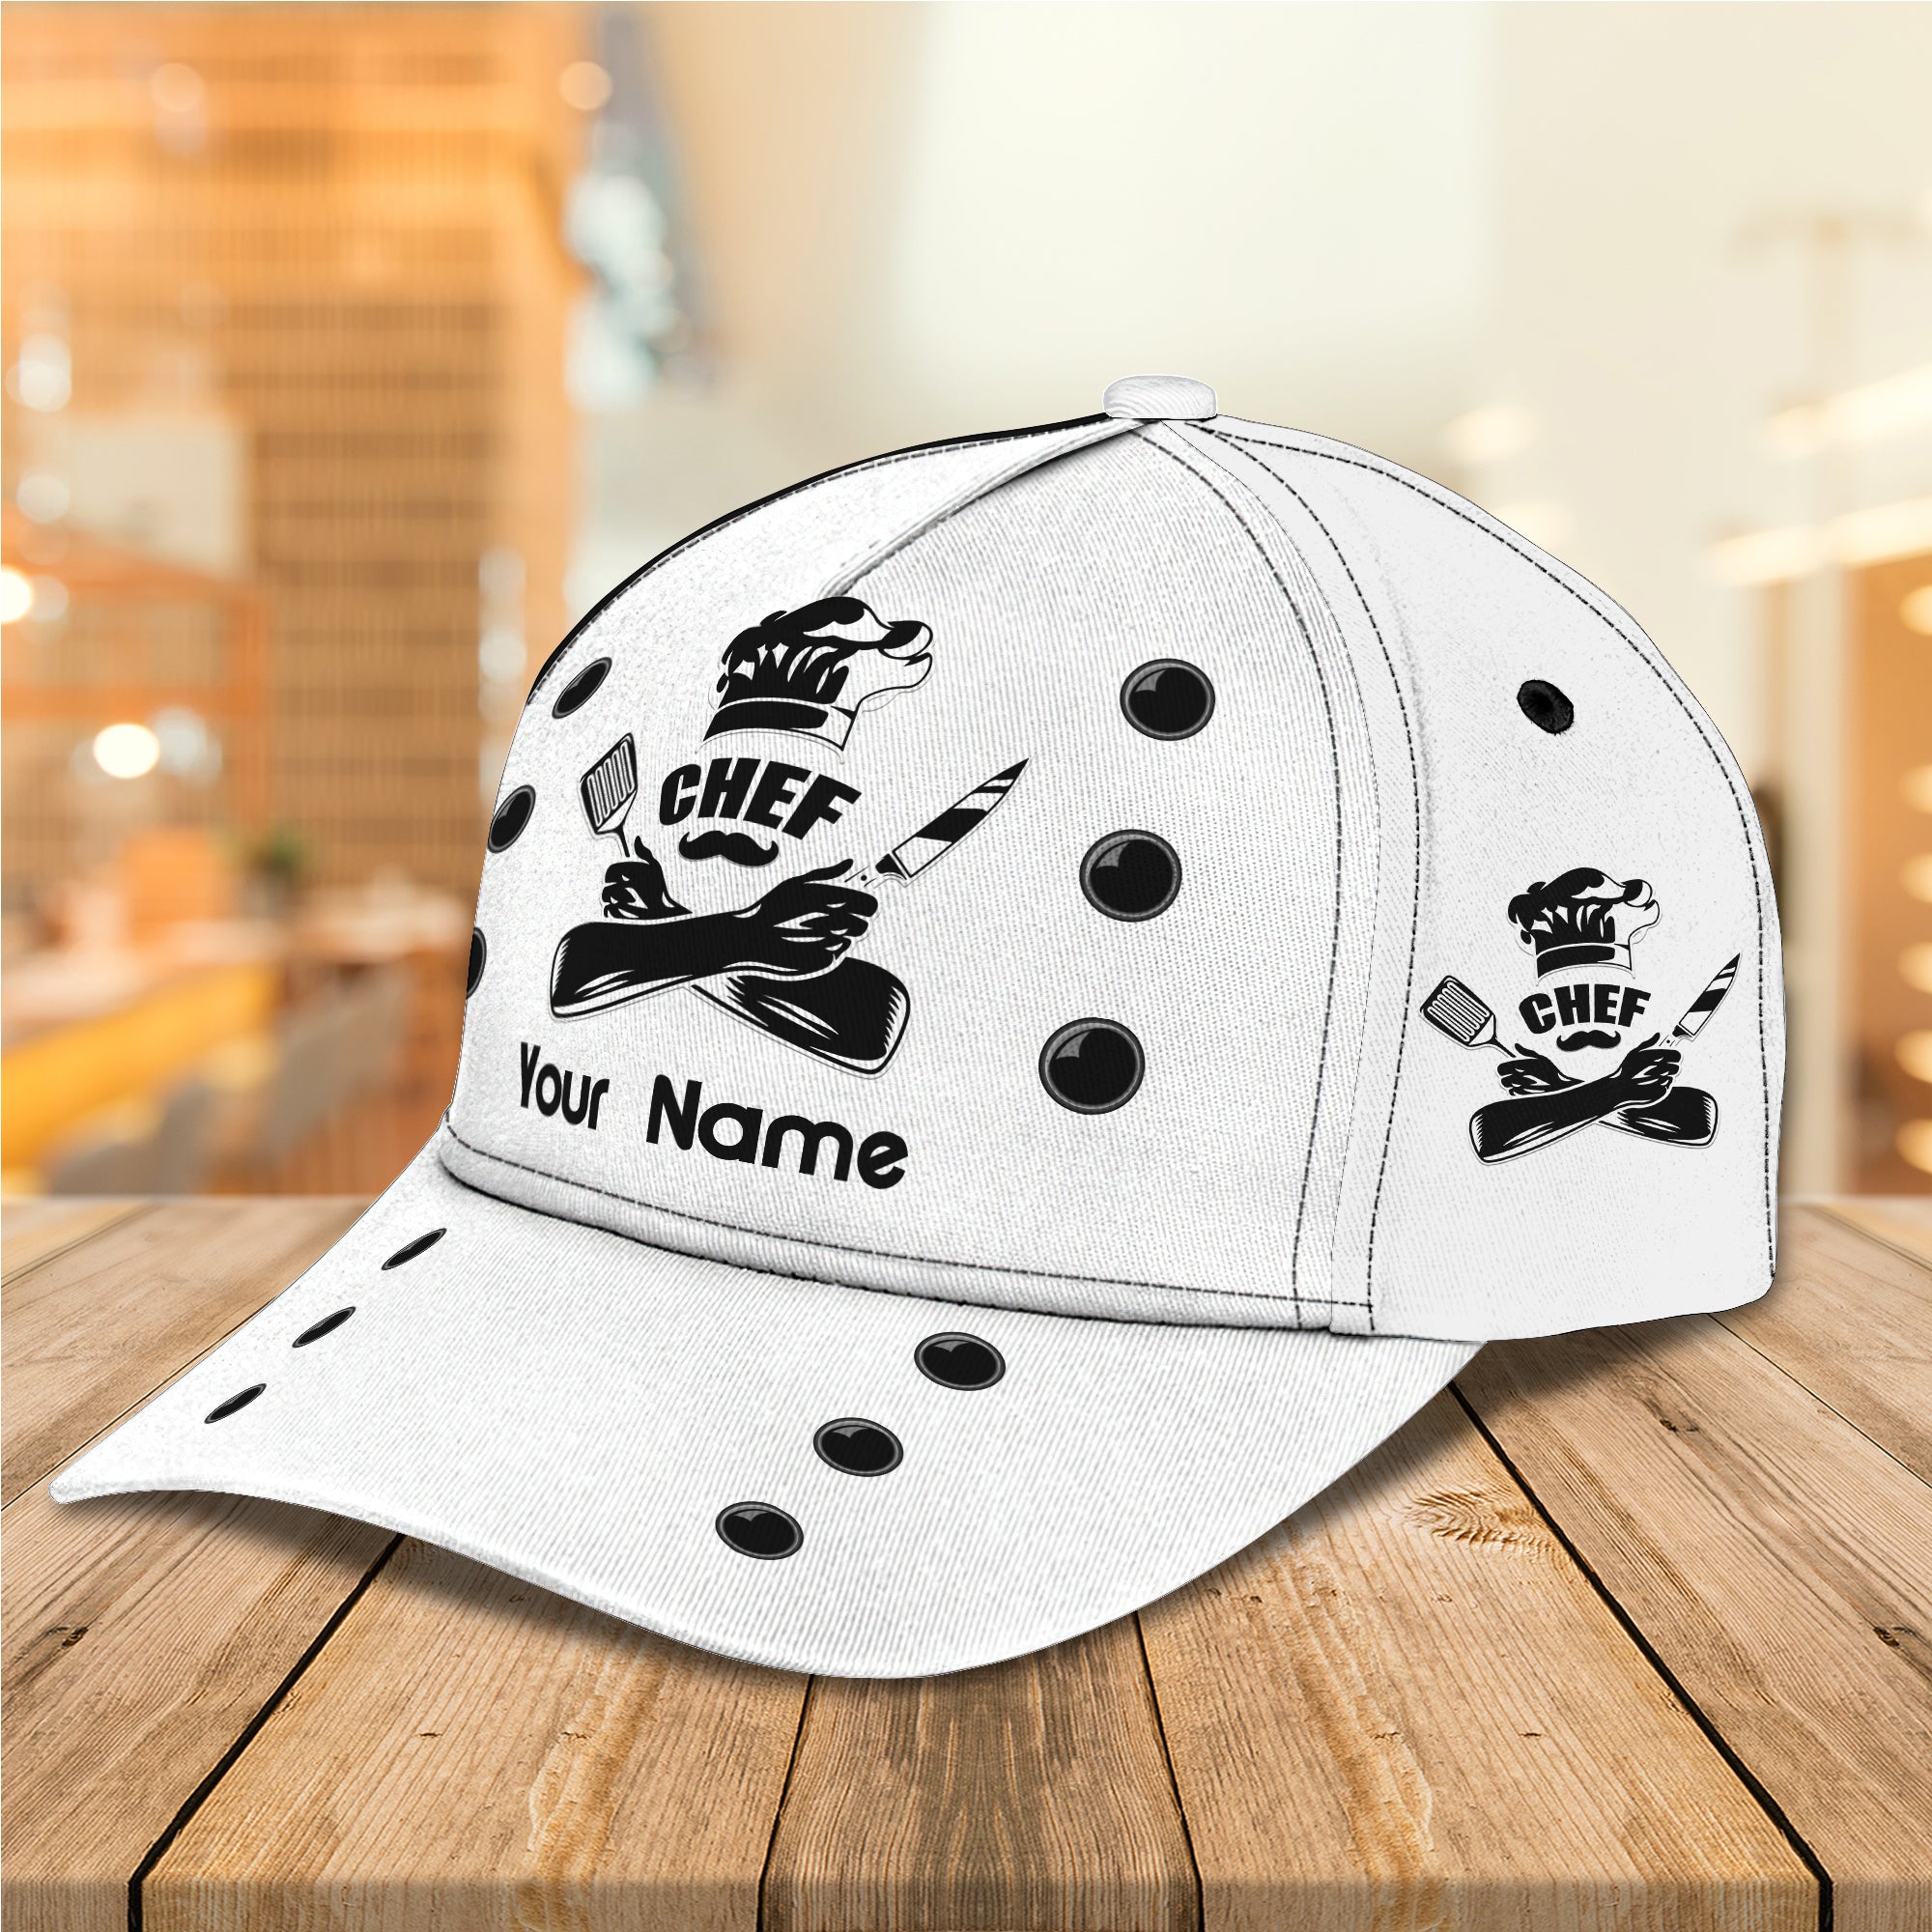 Chef - Personalized Name Cap 53 - Bhn97